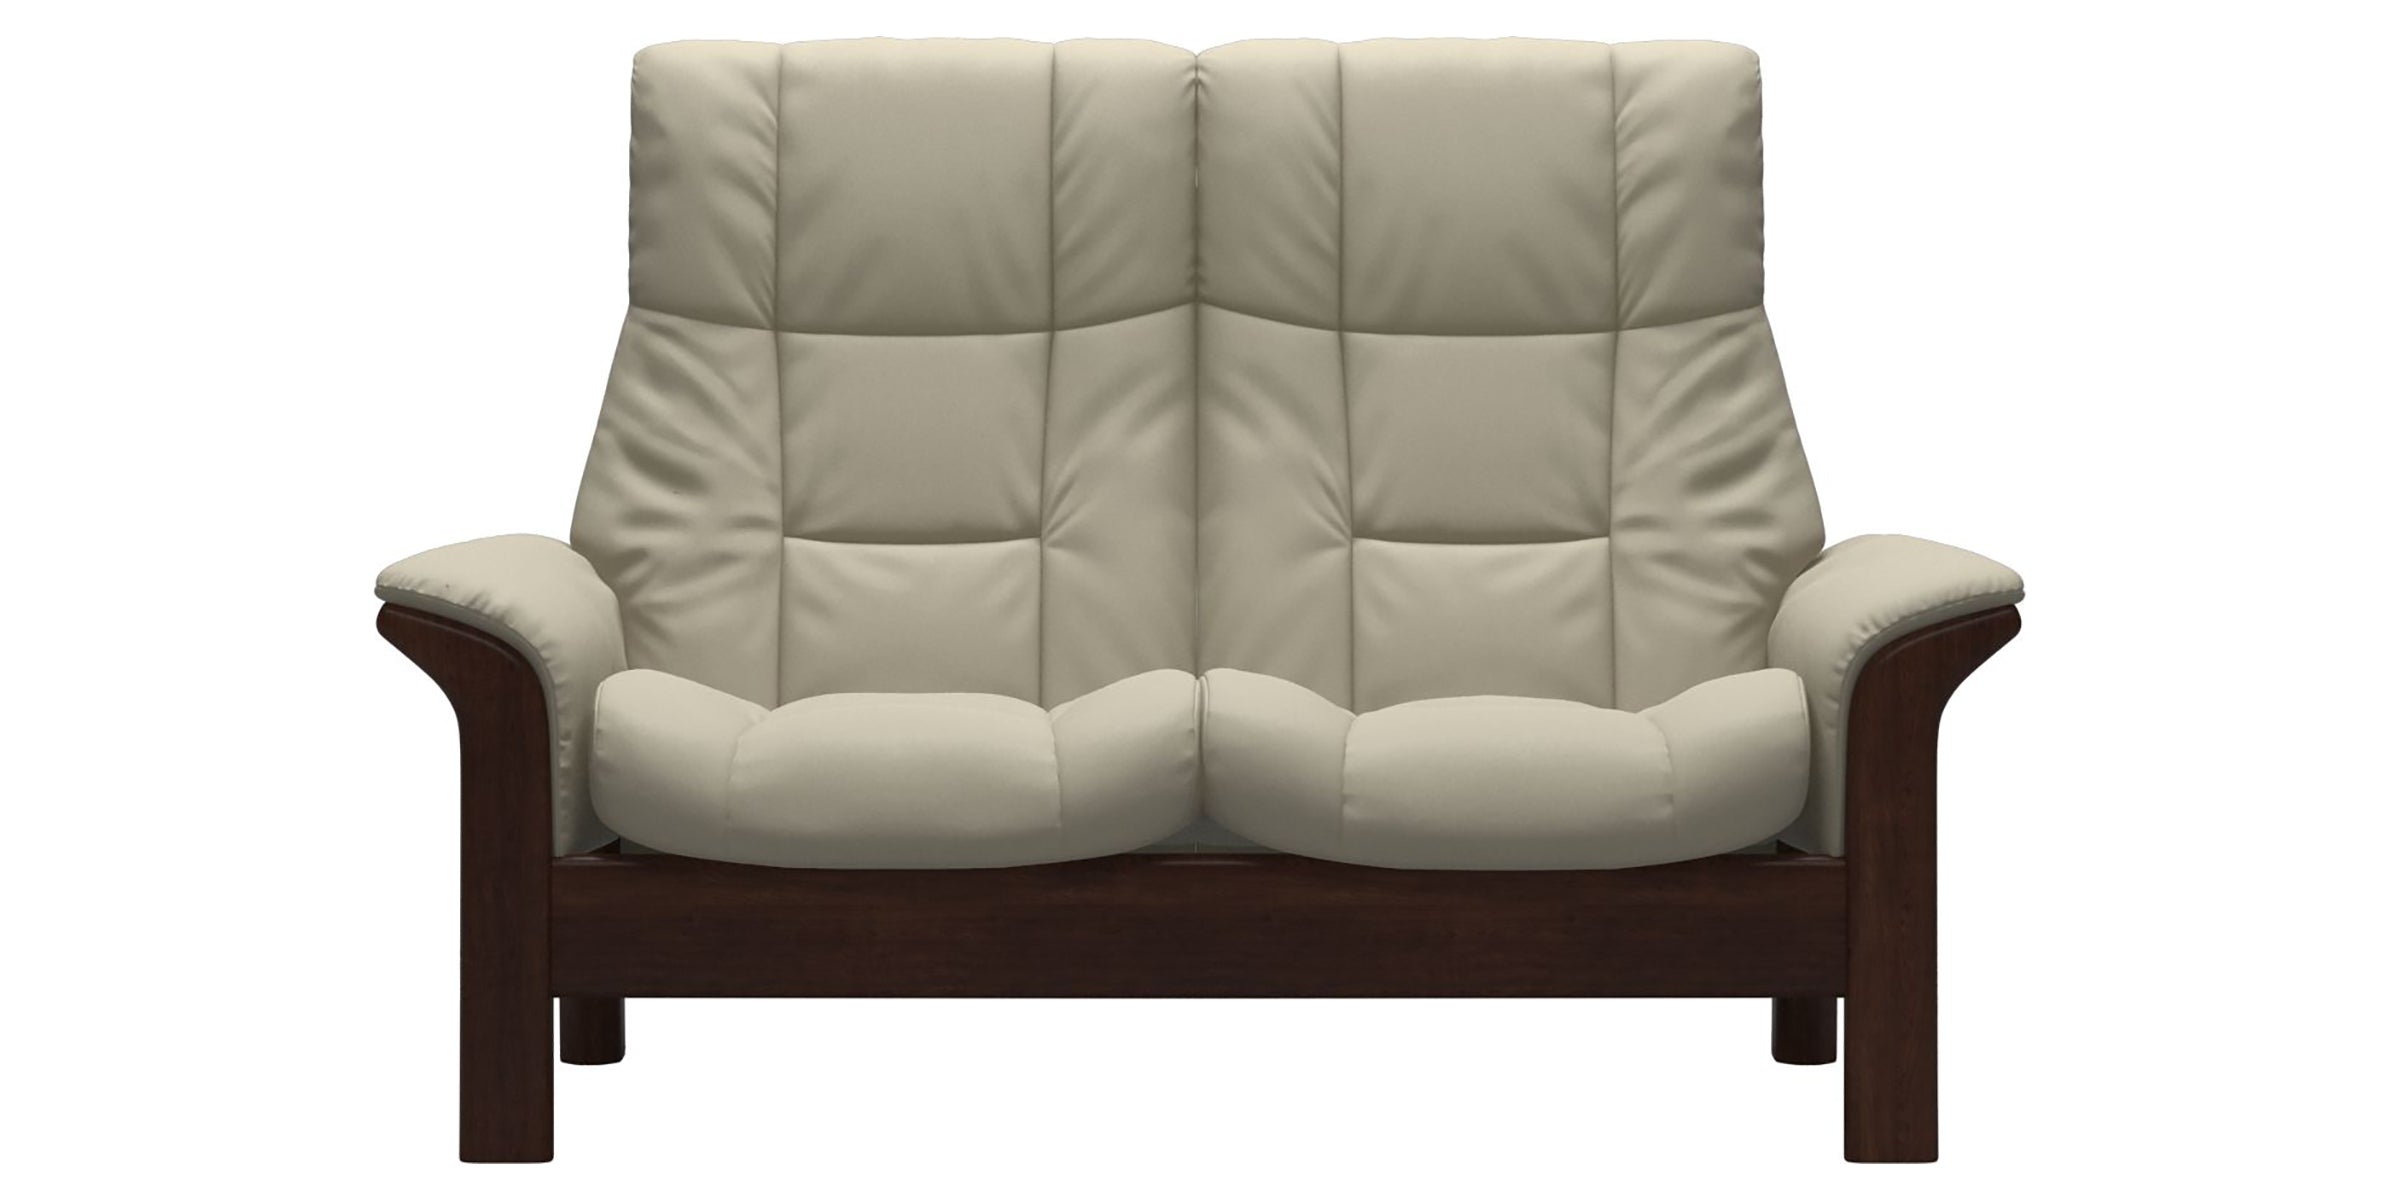 Paloma Leather Light Grey and Brown Base | Stressless Windsor 2-Seater High Back Sofa | Valley Ridge Furniture